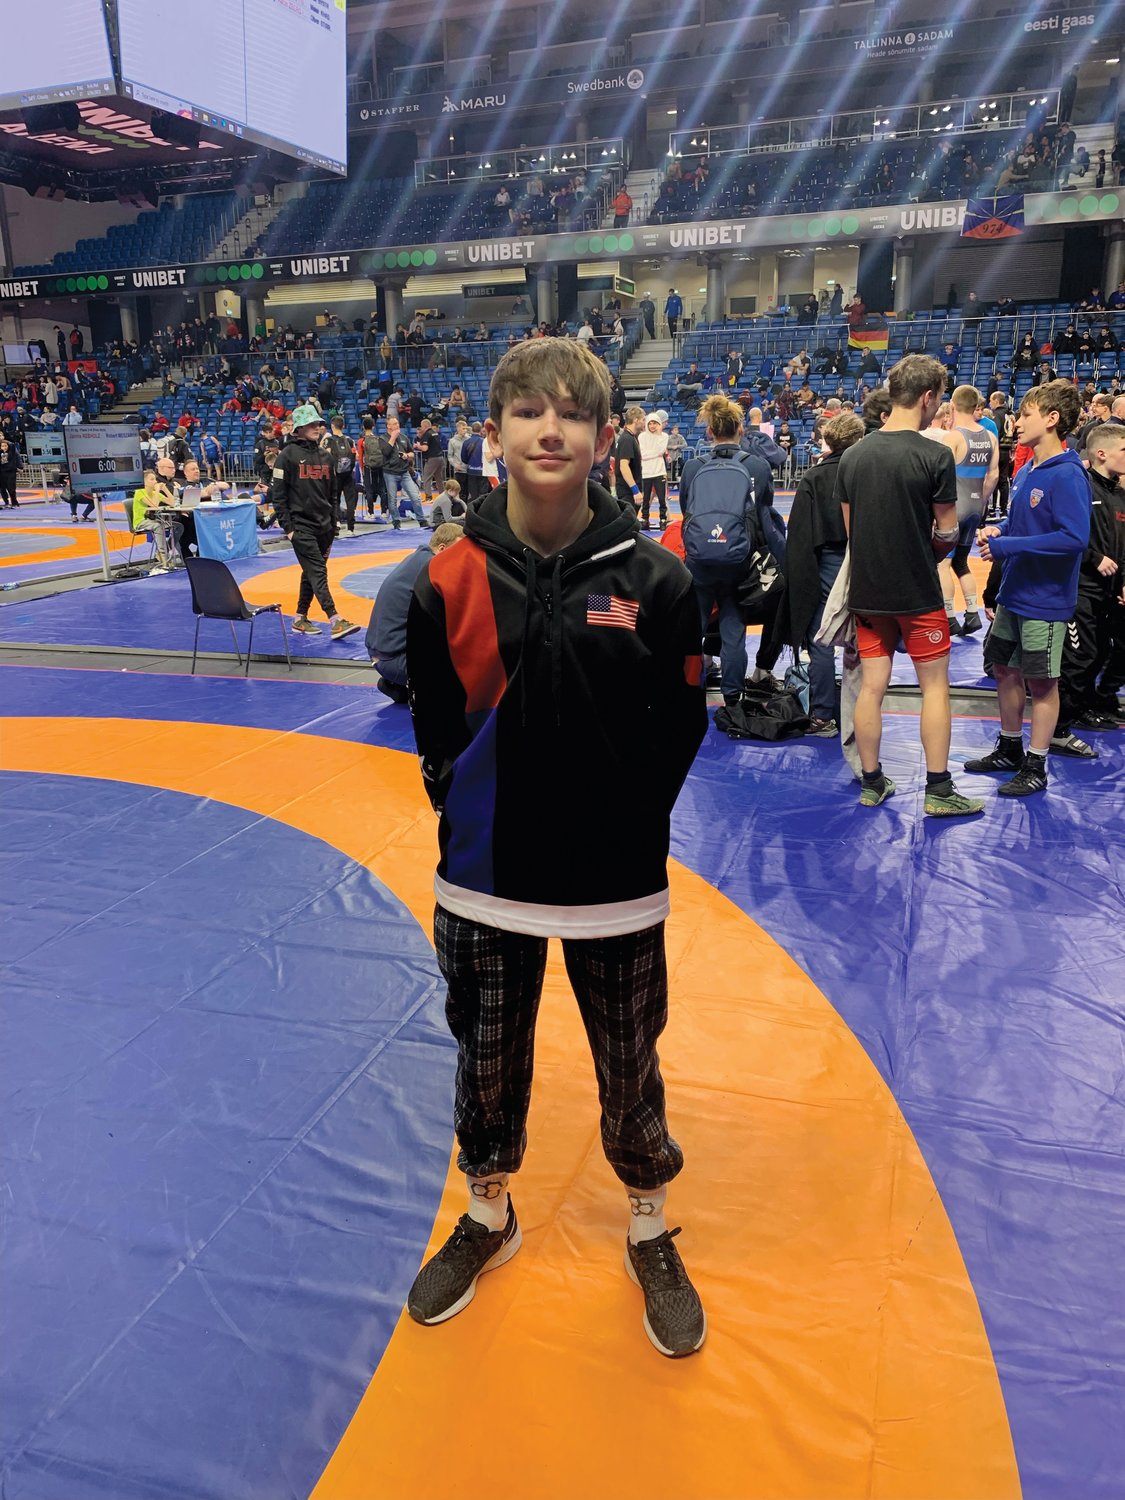 Seaforth freshman Gabe Rogers traveled to Europe last week to compete in the Talinn Open in Estonia.